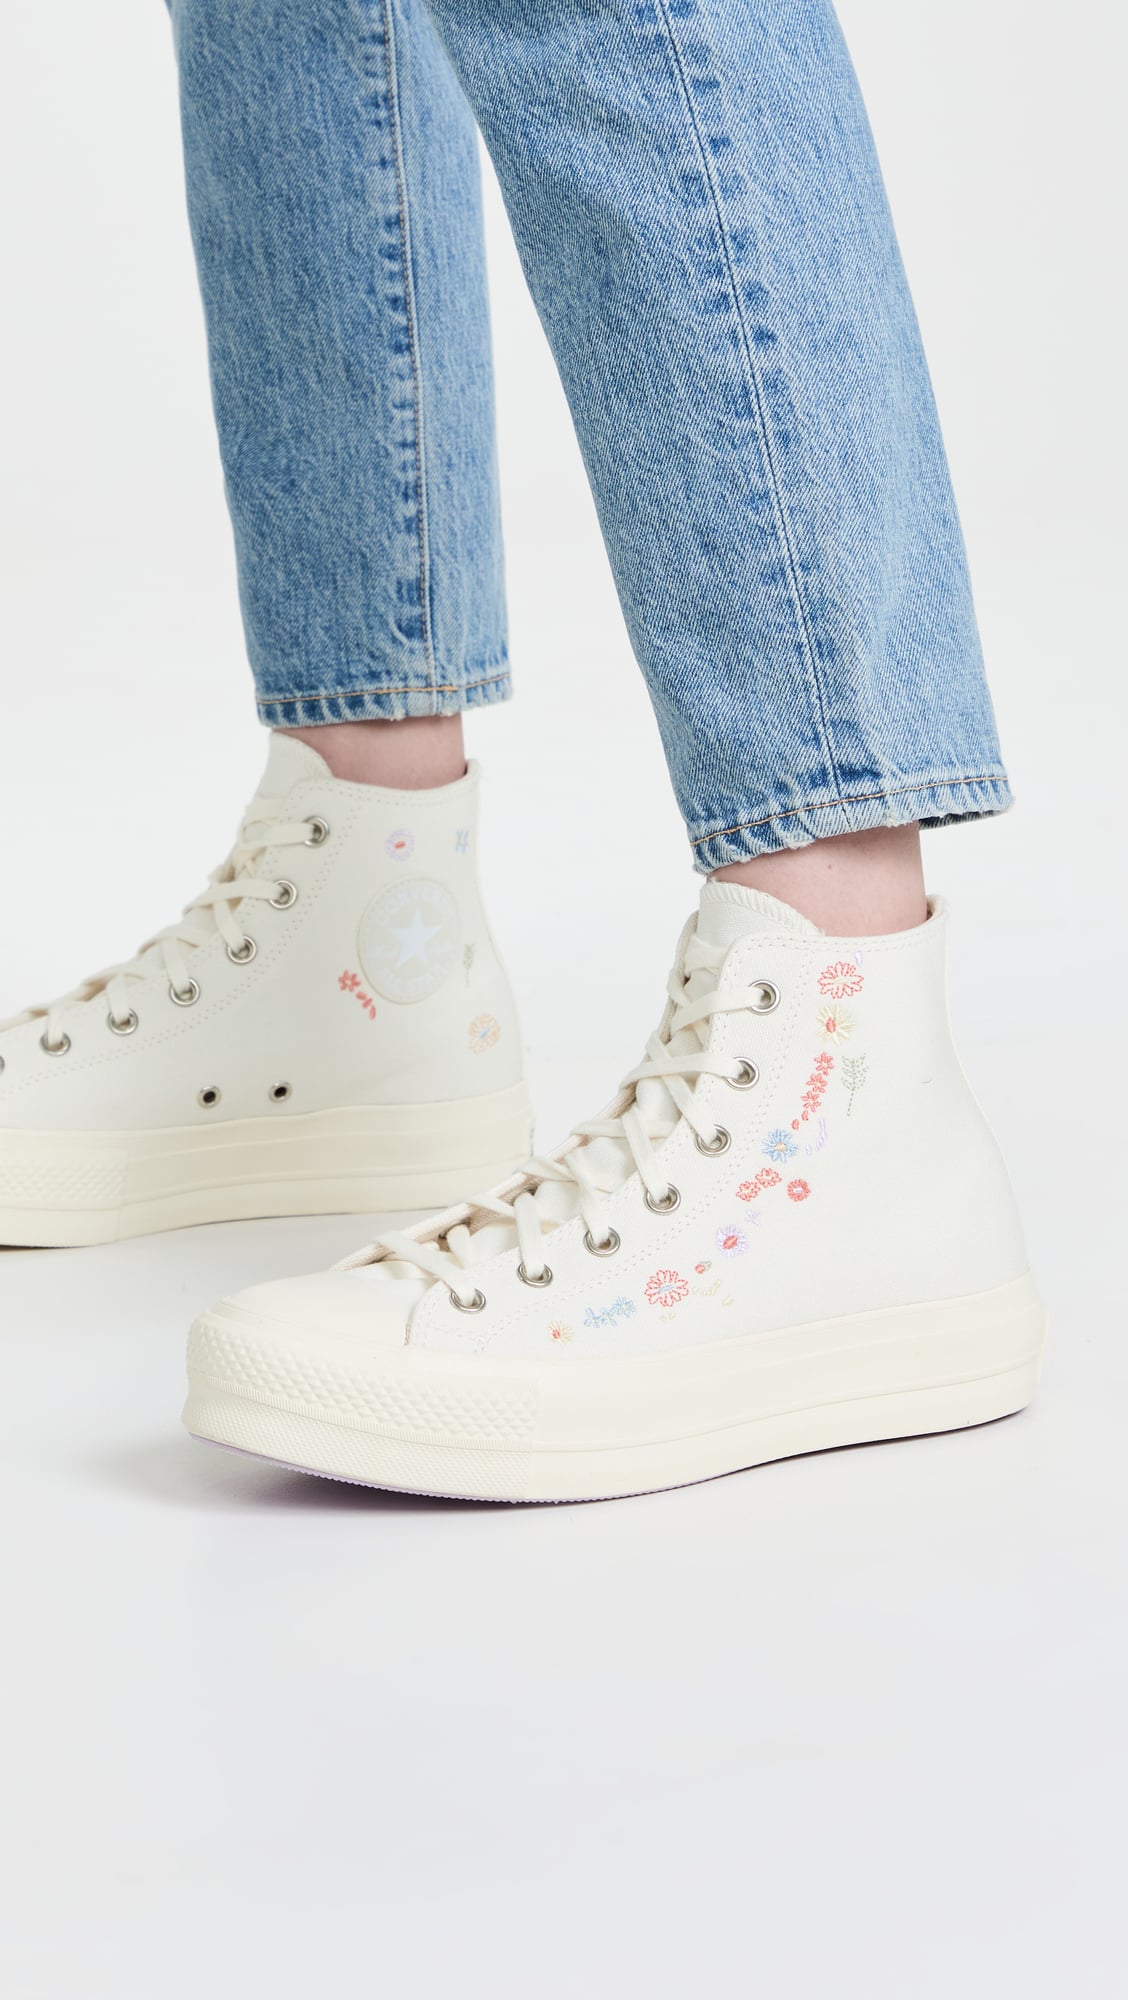 Platform Sneakers: Converse Chuck Taylor All Star Lift Sneakers | 14 of the  Standout Spring Arrivals at Shopbop | POPSUGAR Fashion Photo 8